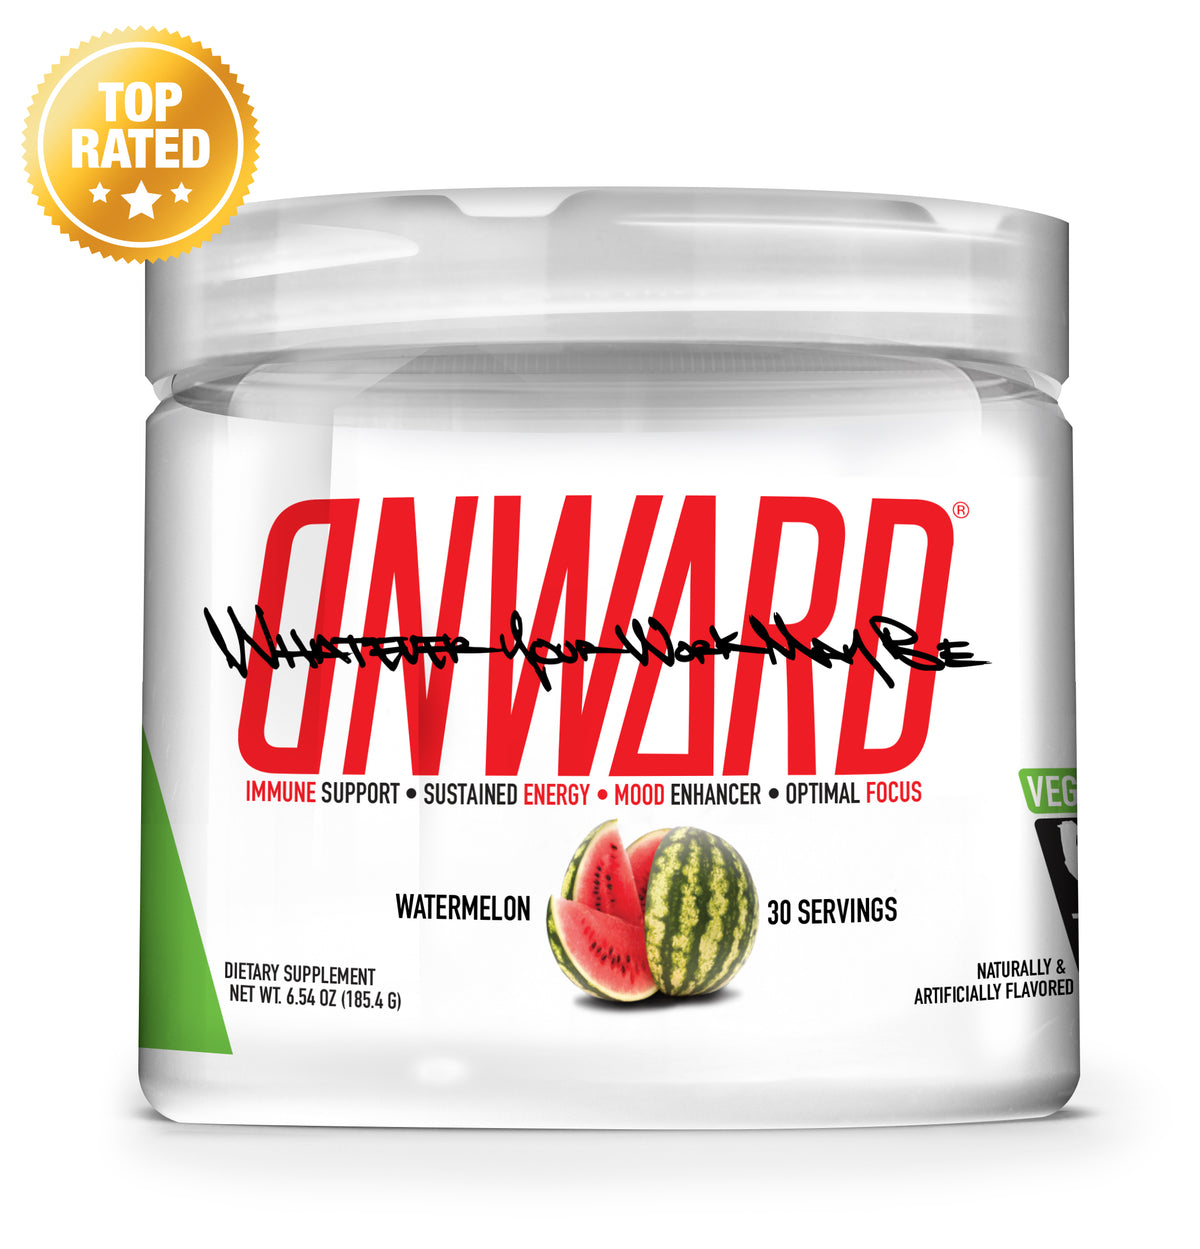 Photo of Onward Watermelon flavor. The container is clear plastic with a clear plastic lid. Onward logo in red with &quot;Whatever your work may be&quot; in black interceding the Onward logo. There is a sliced watermelon on the packaging.